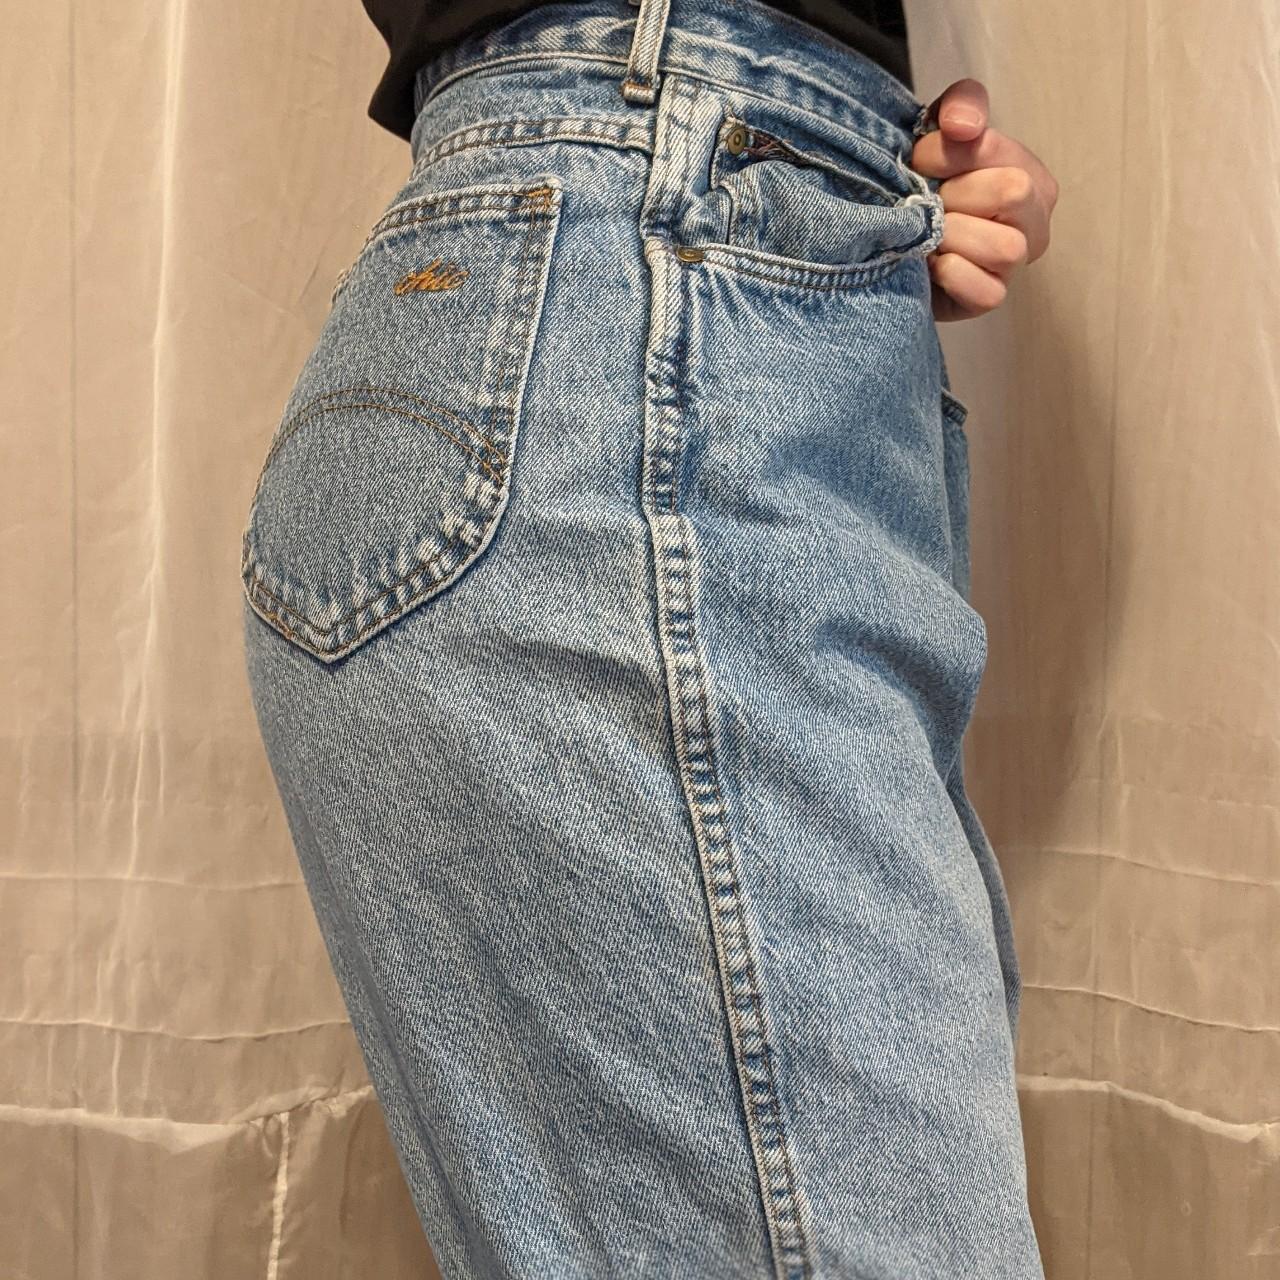 Vintage 80s high-waisted chic jeans 100%... - Depop